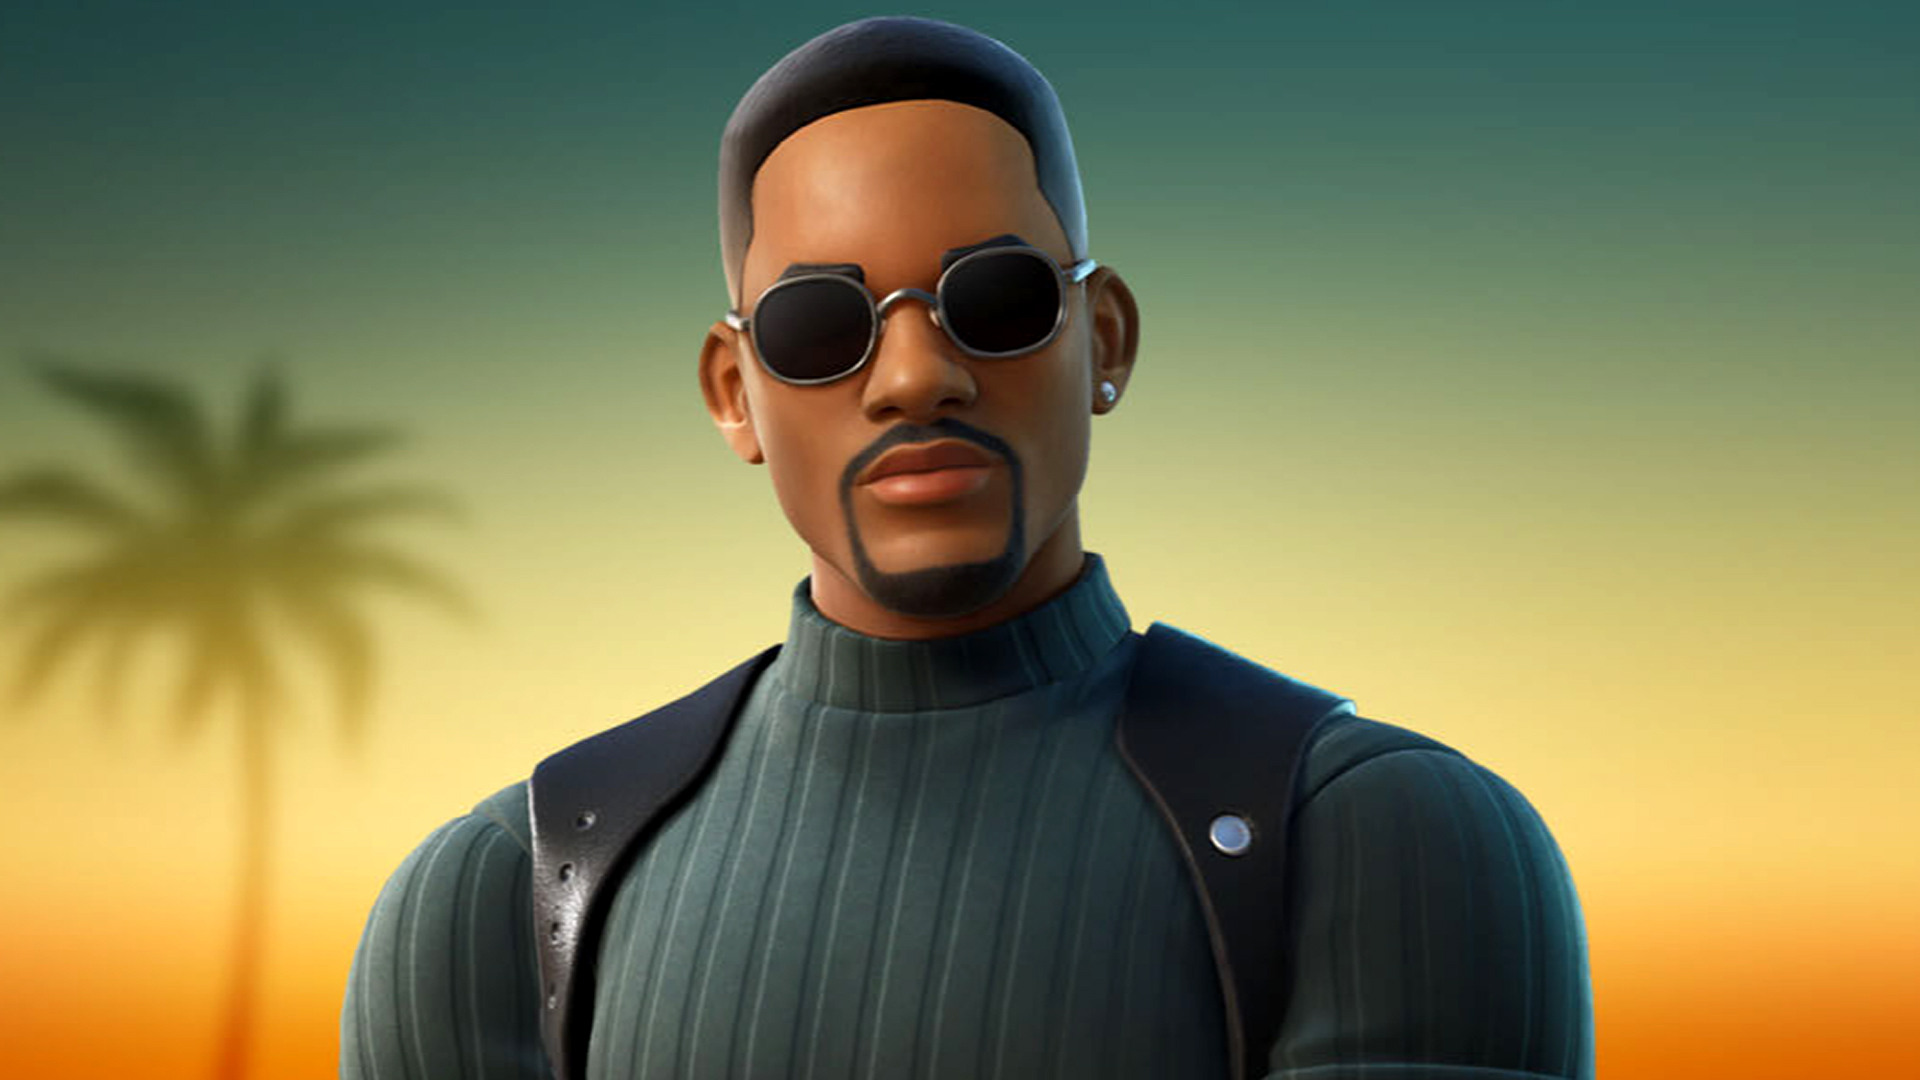 Fortnite’s alien season adds the one Will Smith character who hasn’t fought aliens